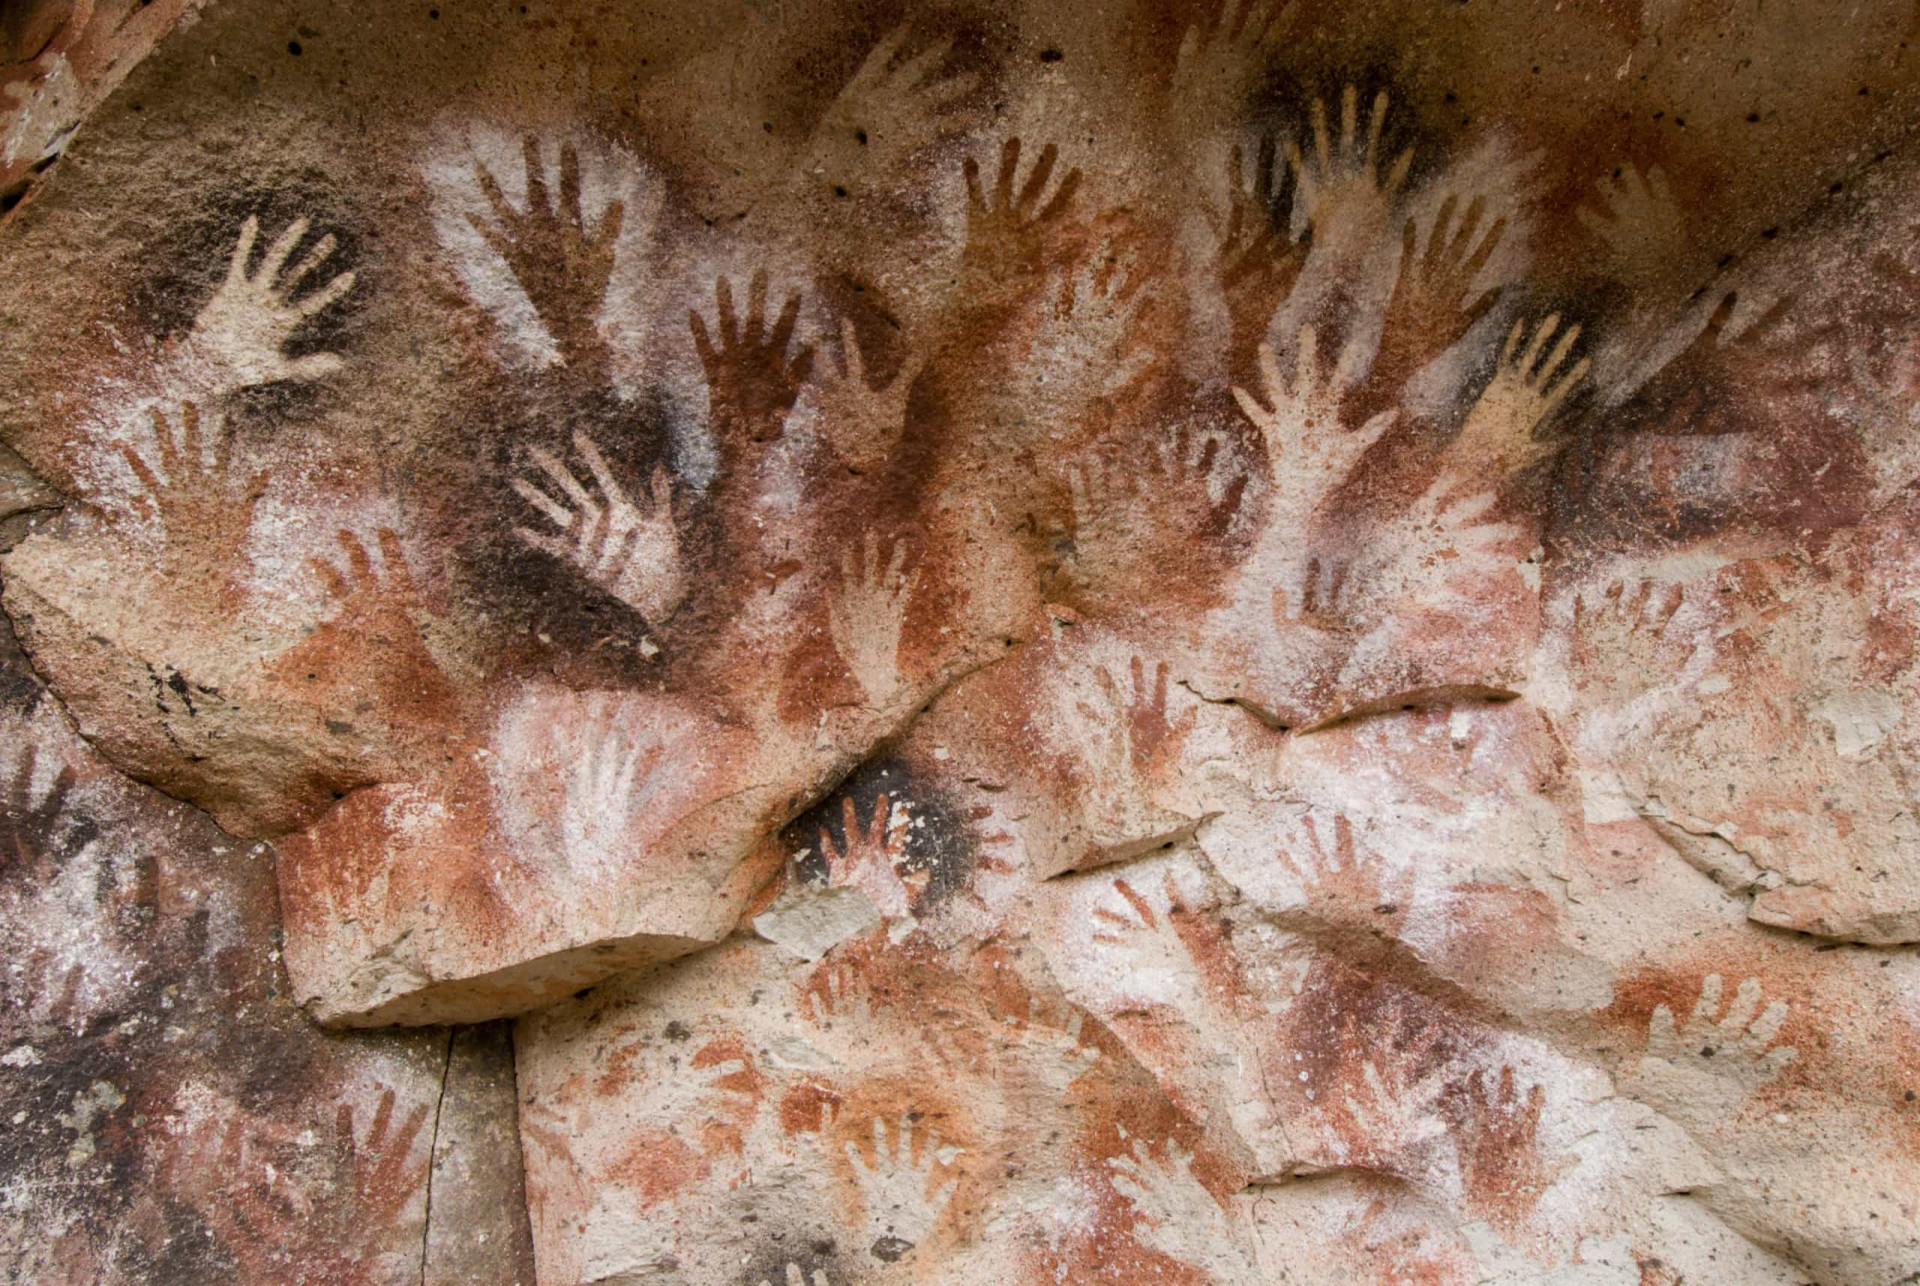 Tourists come from all around the world to see one of the first artworks ever recorded. It dates back to around 7300 BCE and is located in the province of Santa Cruz.<p><a href="https://www.msn.com/en-us/community/channel/vid-7xx8mnucu55yw63we9va2gwr7uihbxwc68fxqp25x6tg4ftibpra?cvid=94631541bc0f4f89bfd59158d696ad7e">Follow us and access great exclusive content every day</a></p>